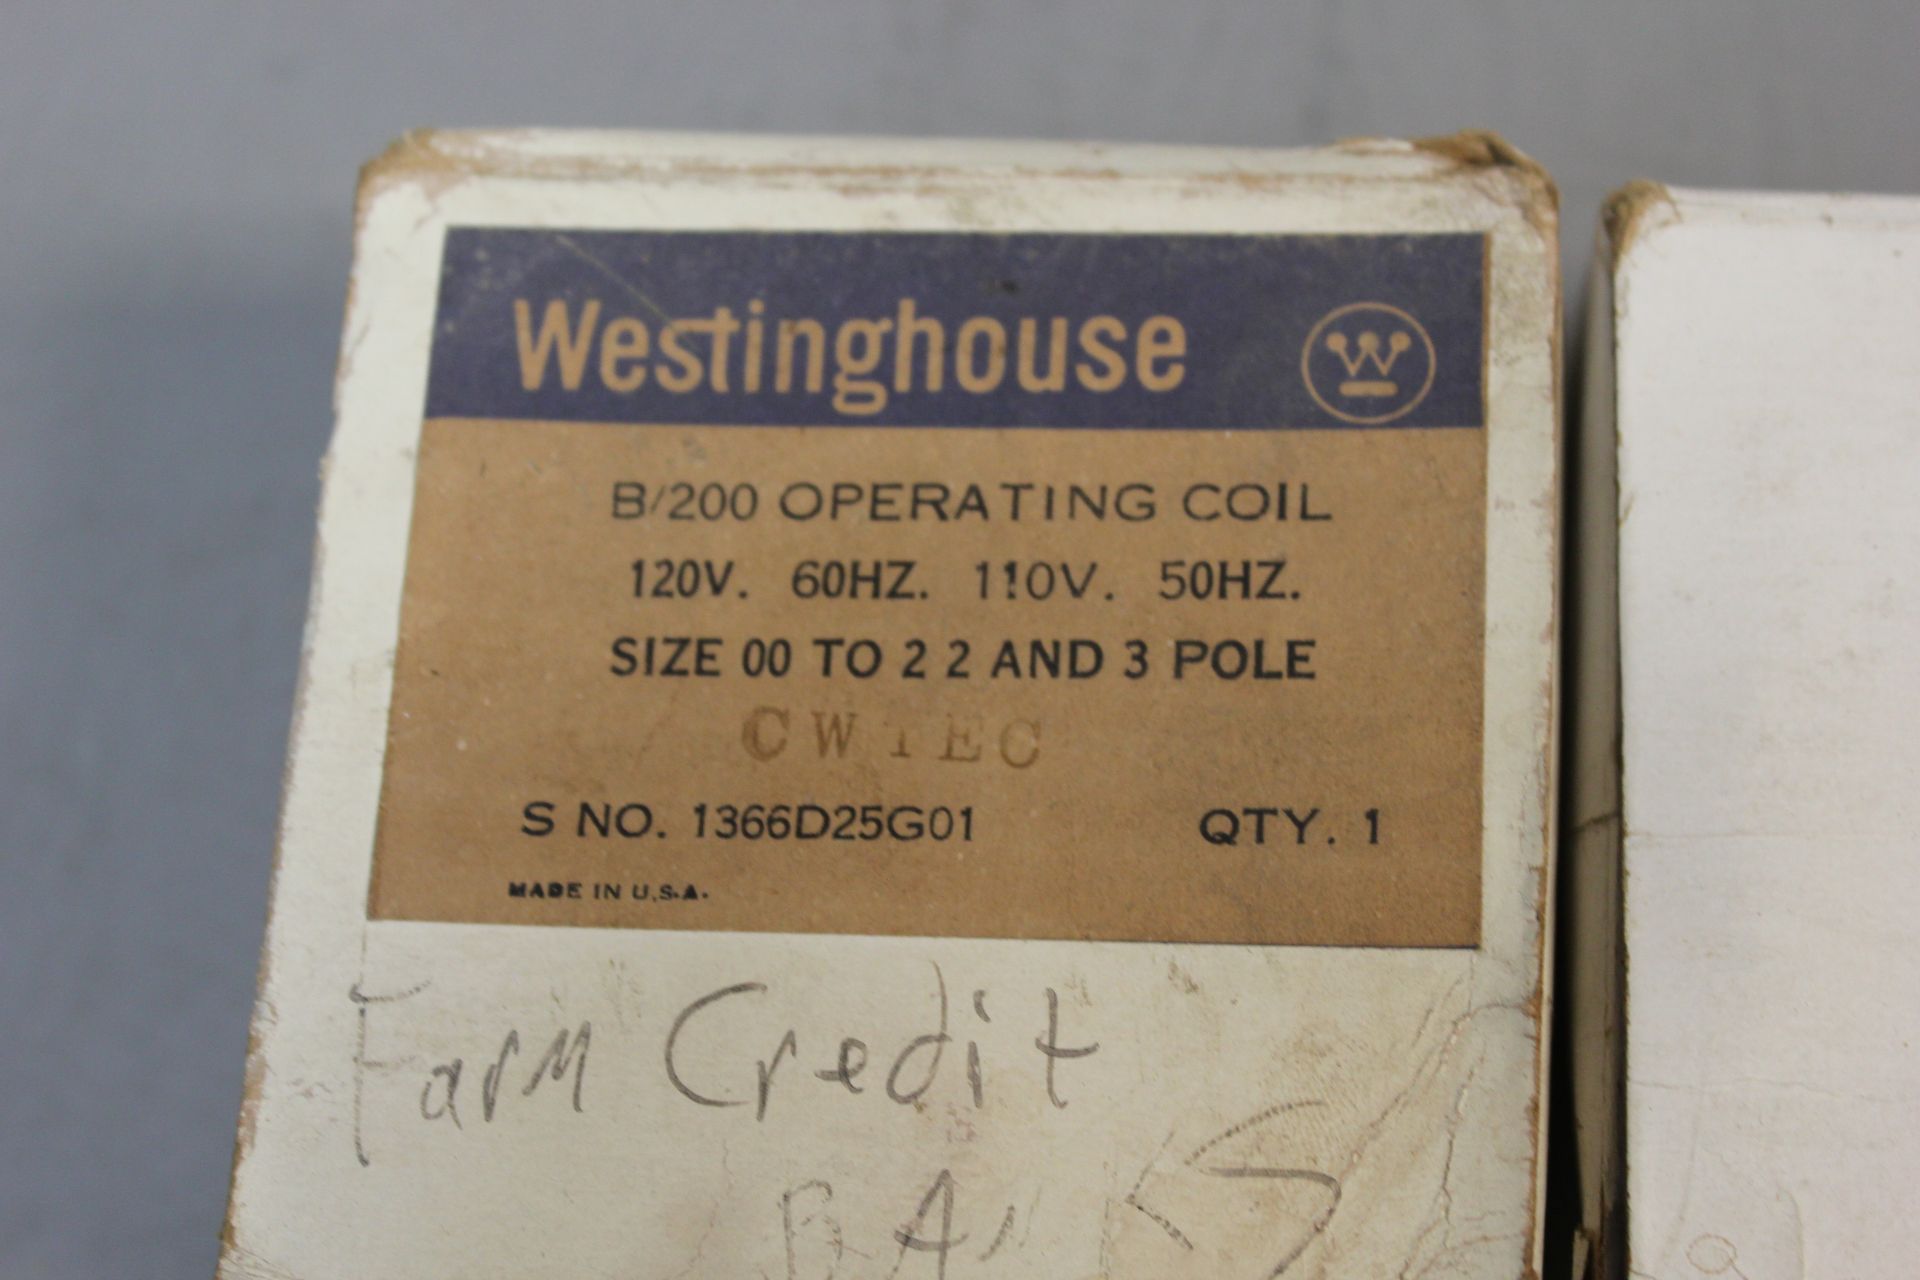 2 NEW WESTINGHOUSE B/200 OPERATING COILS - Image 3 of 3